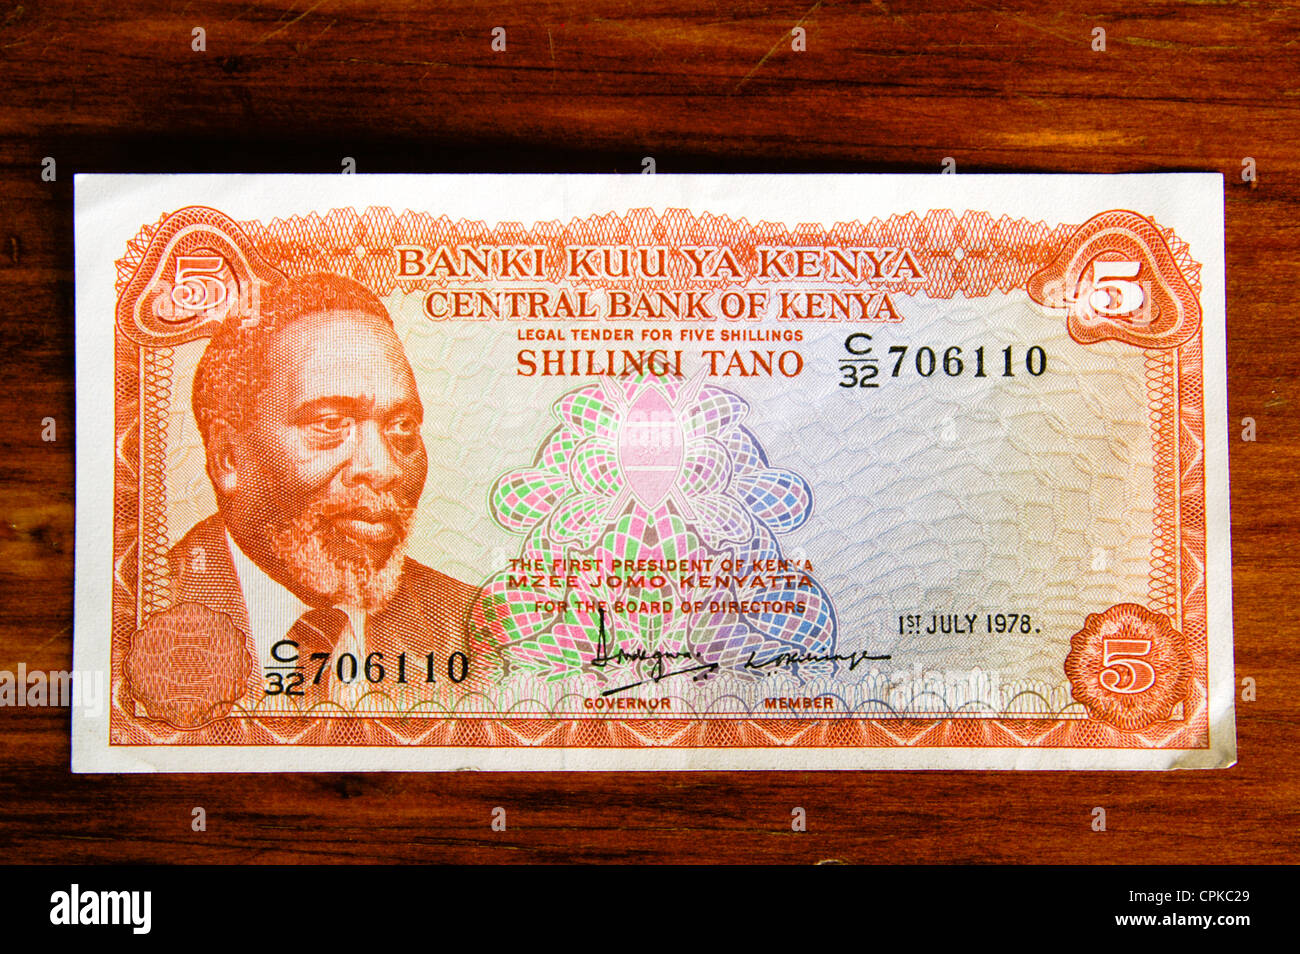 Currency Kenya Shilling Stock Photos Currency Kenya Shilling Stock - 